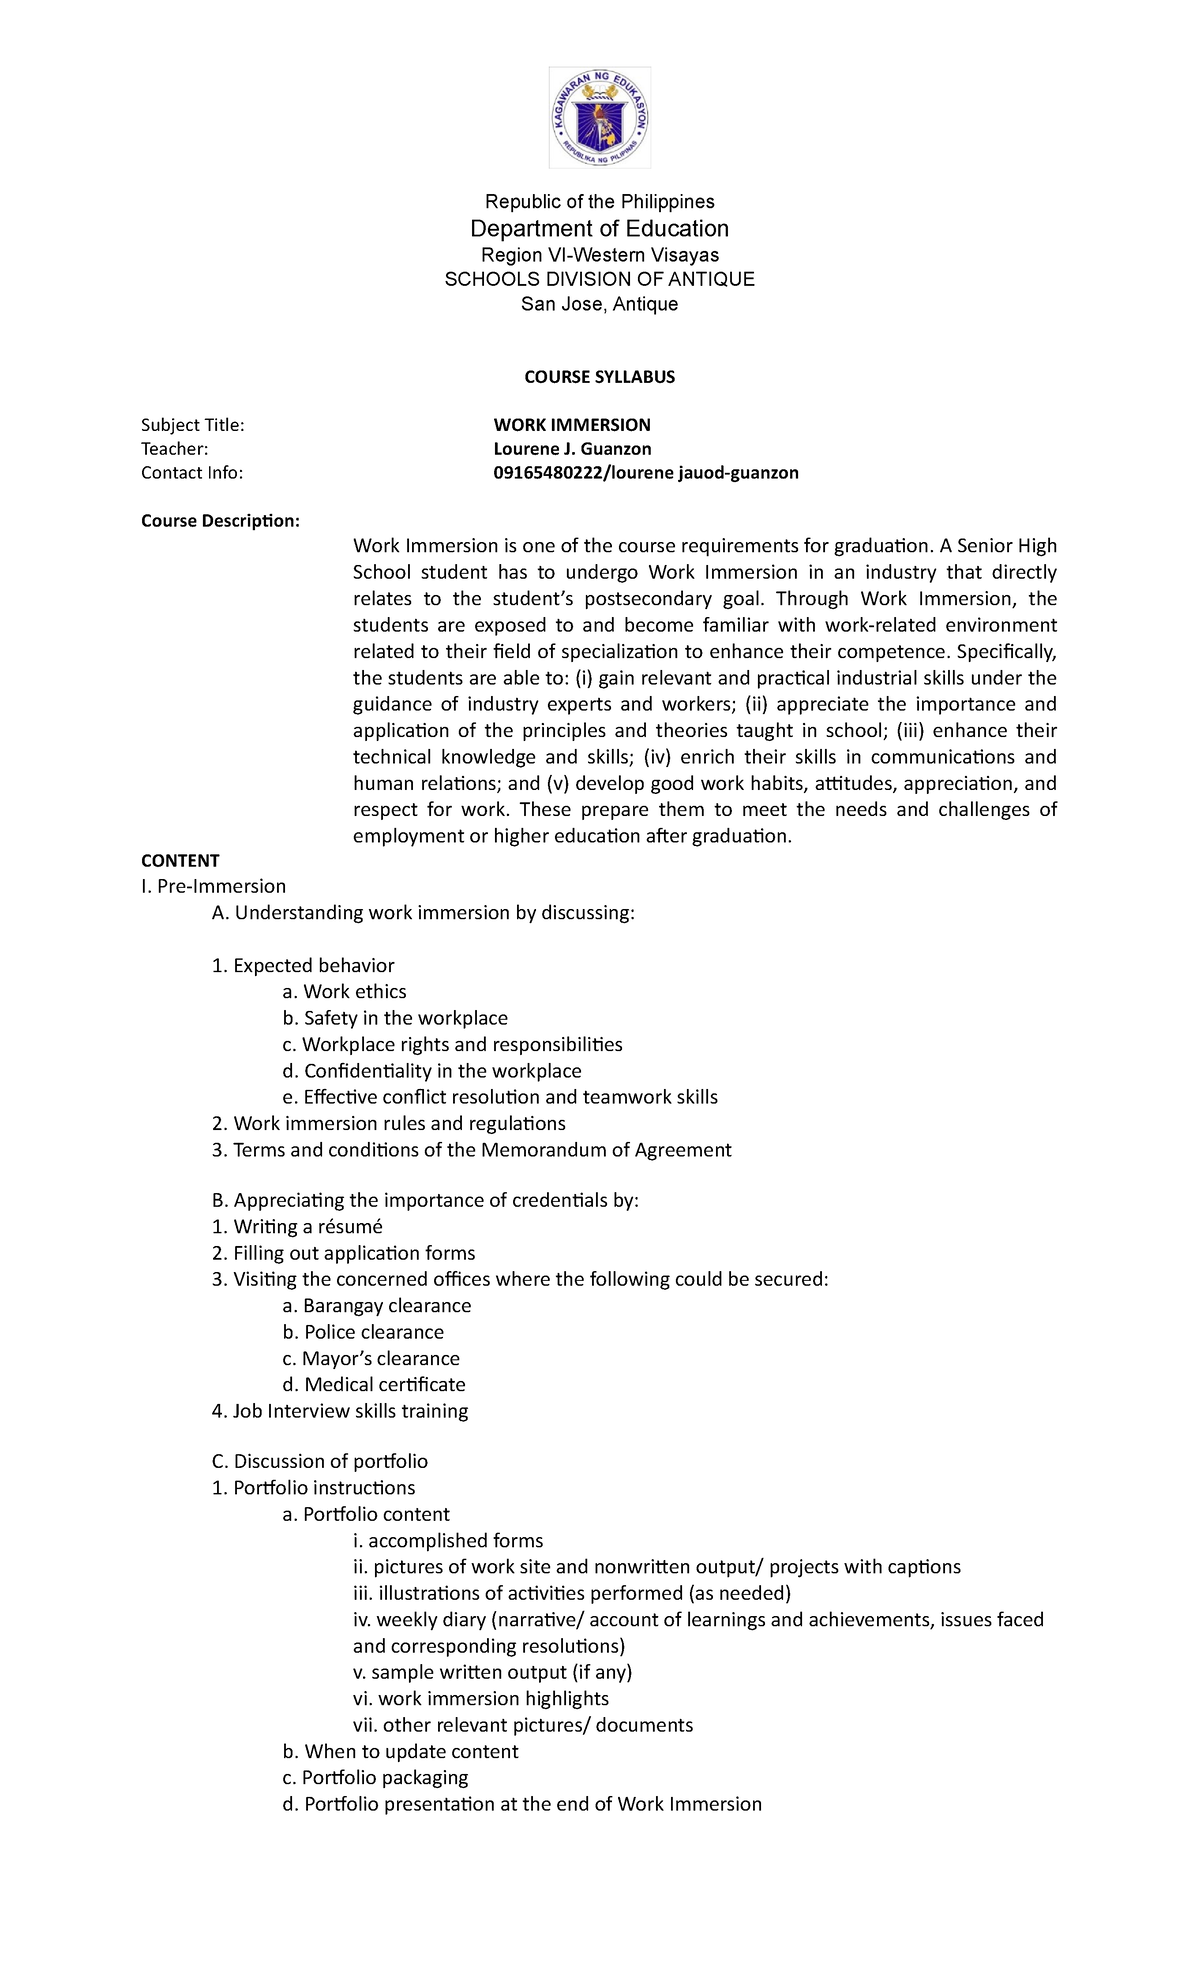 Work Immersion - syllabus - Republic of the Philippines Department of ...